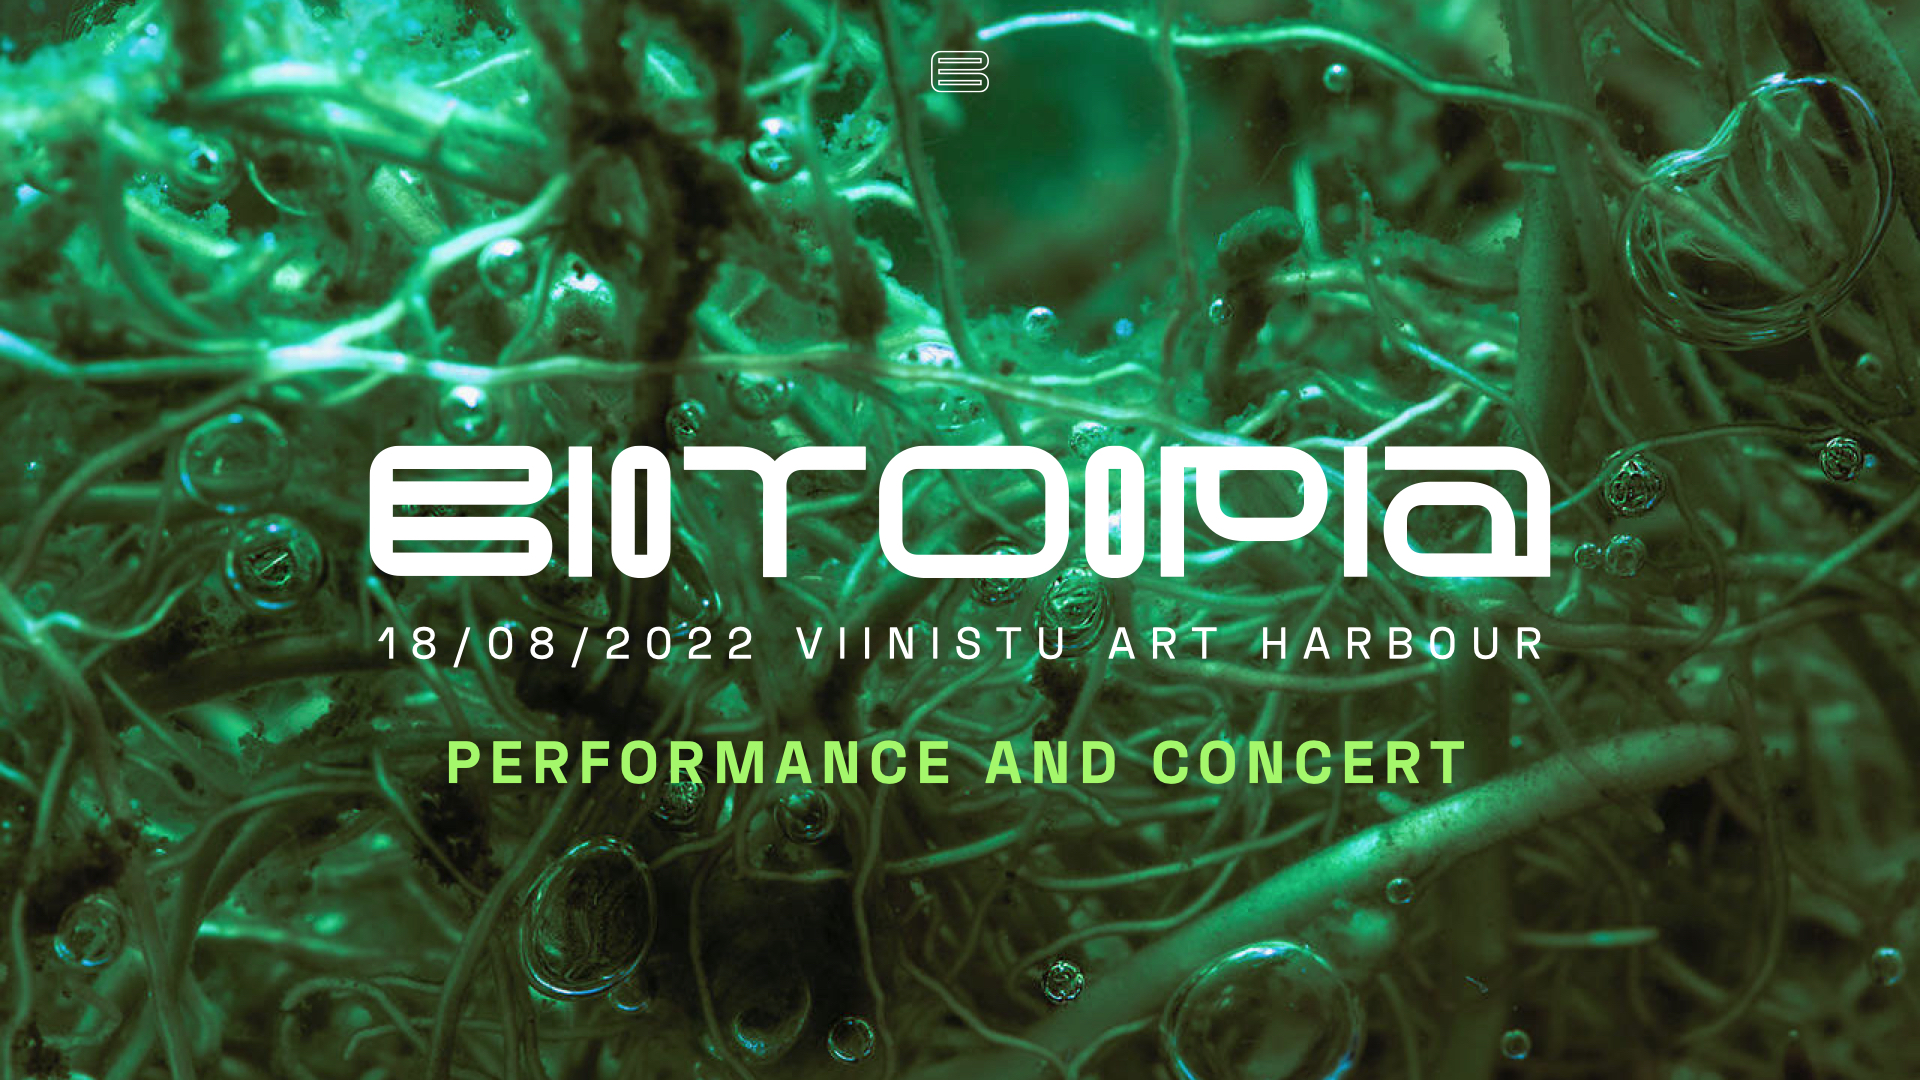 Biotoopia’22: performance and concert